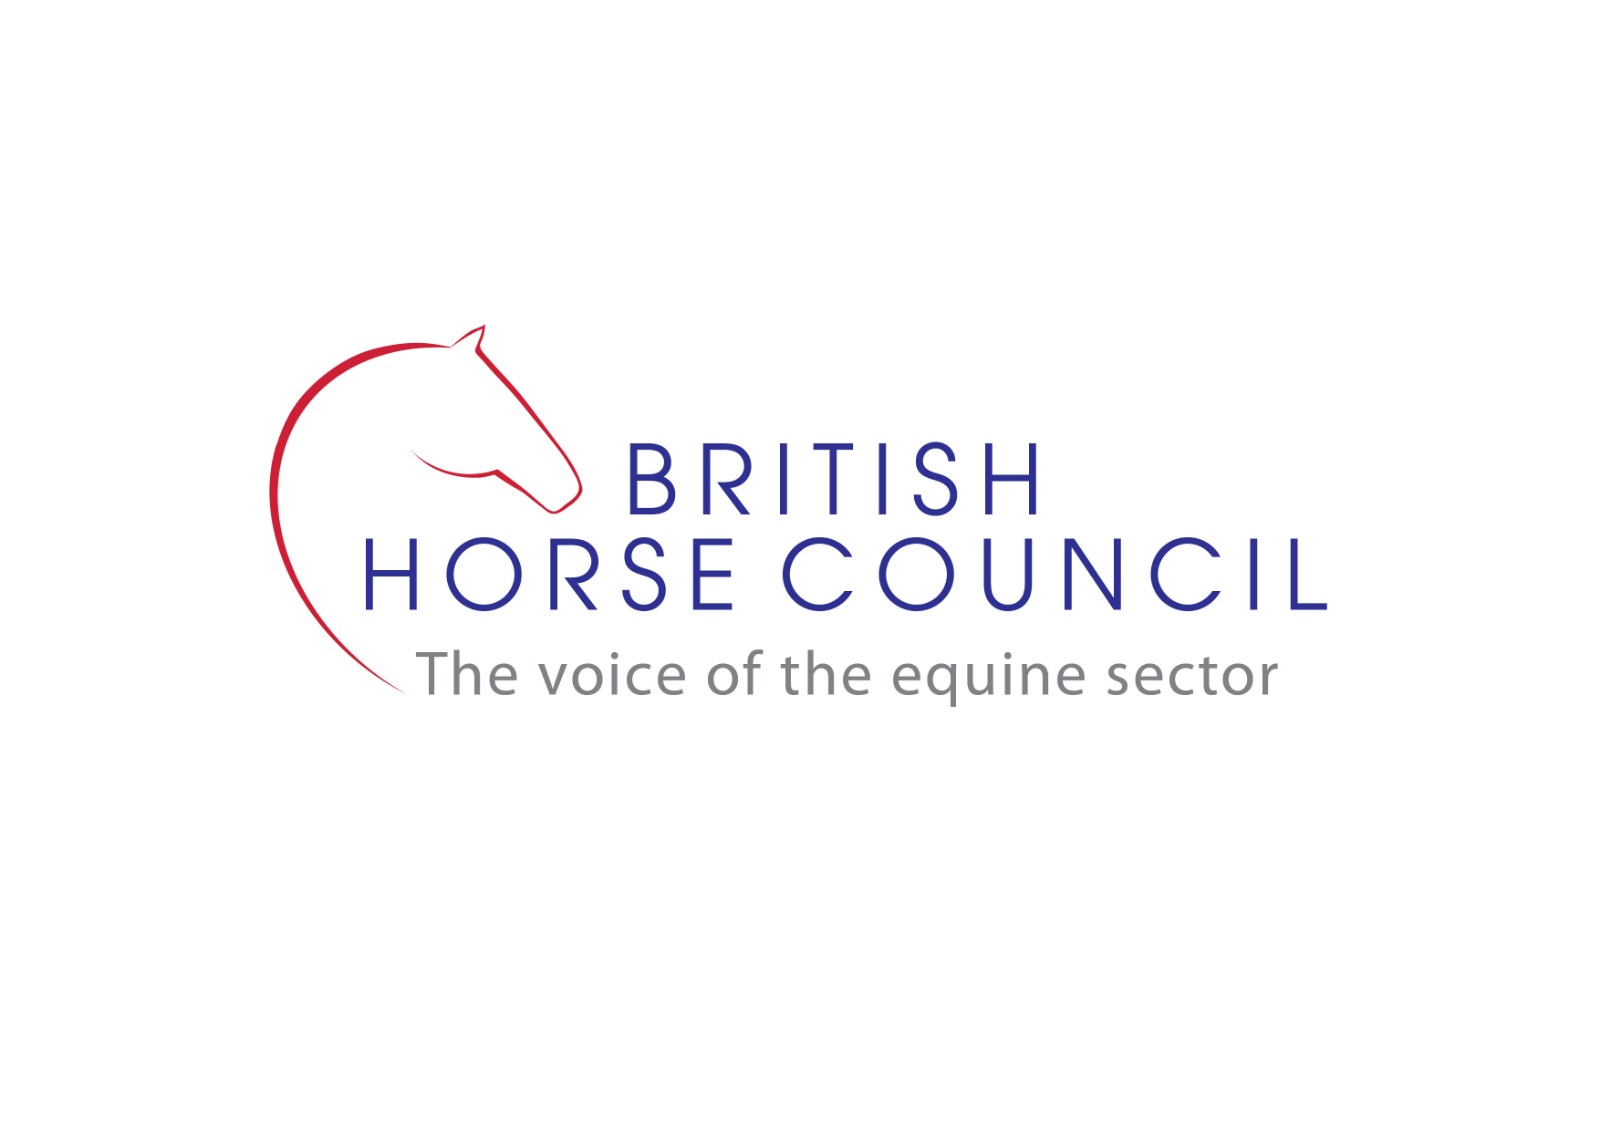 British Horse Council Logo - a horse head in red including the wording The Voice of the Equine Sector underneath